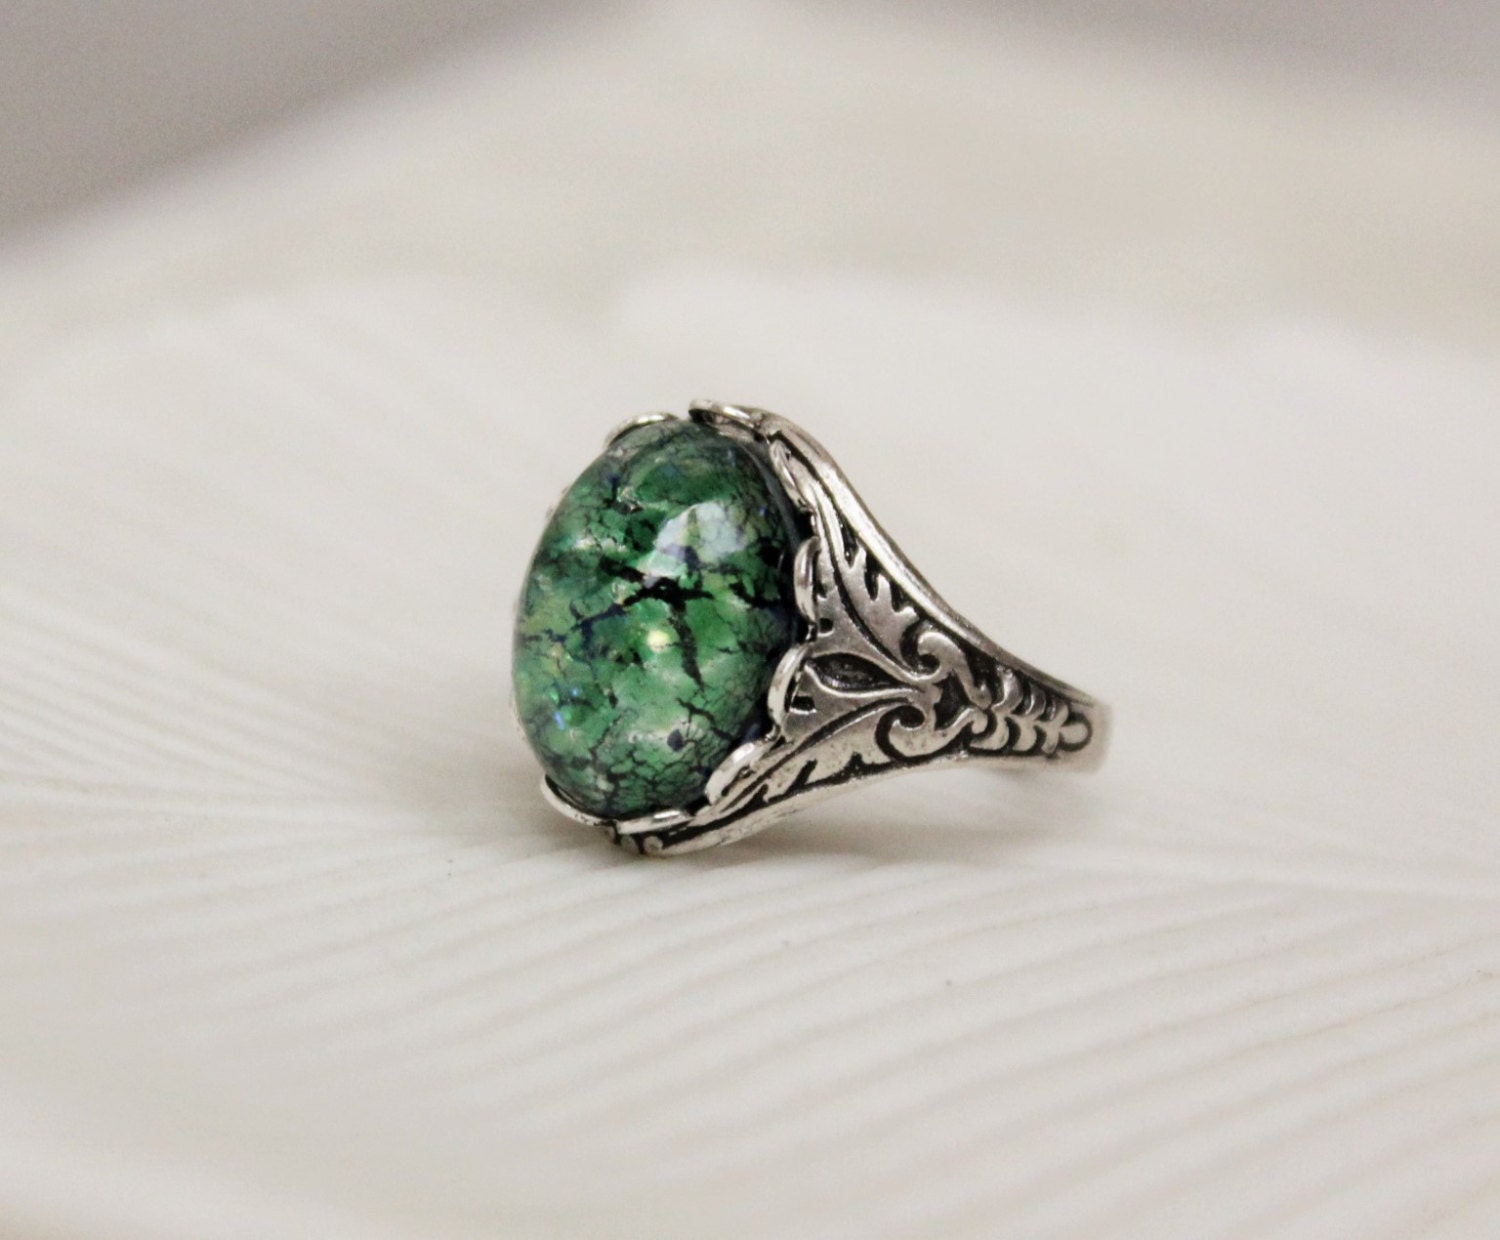 Green Opal Ring. Antique Silver or Antique Brass